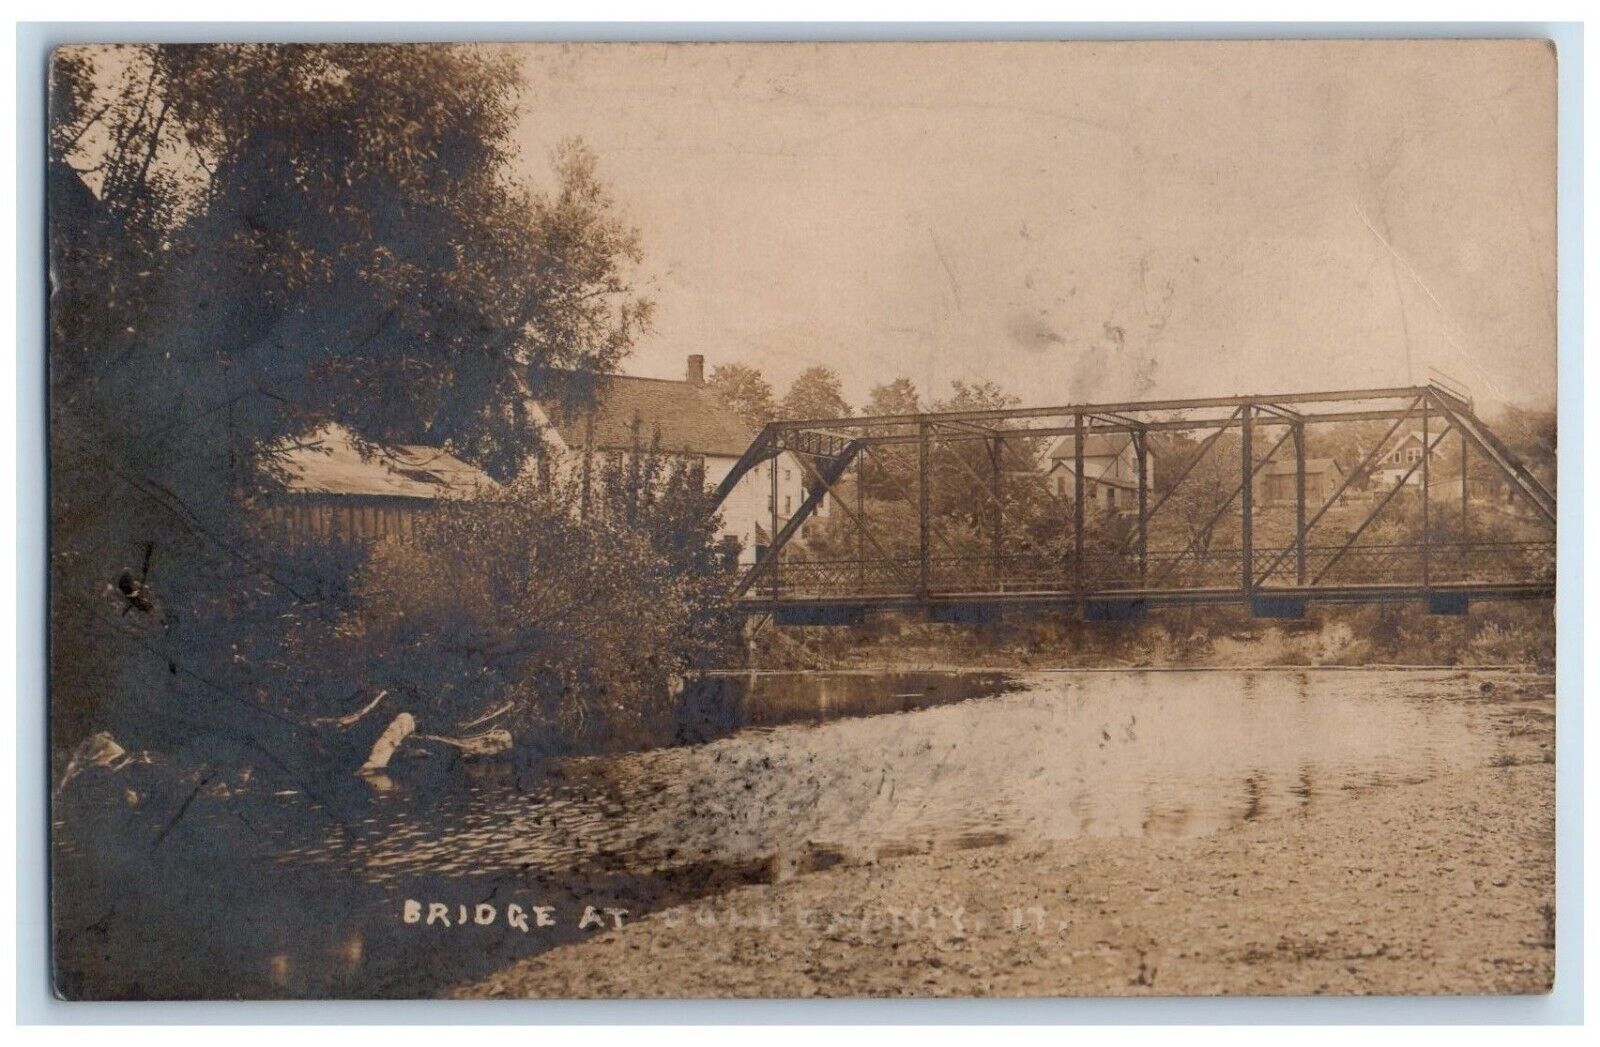 1926 View Of Bridge At Golden New York NY RPPC Photo Posted Vintage Postcard